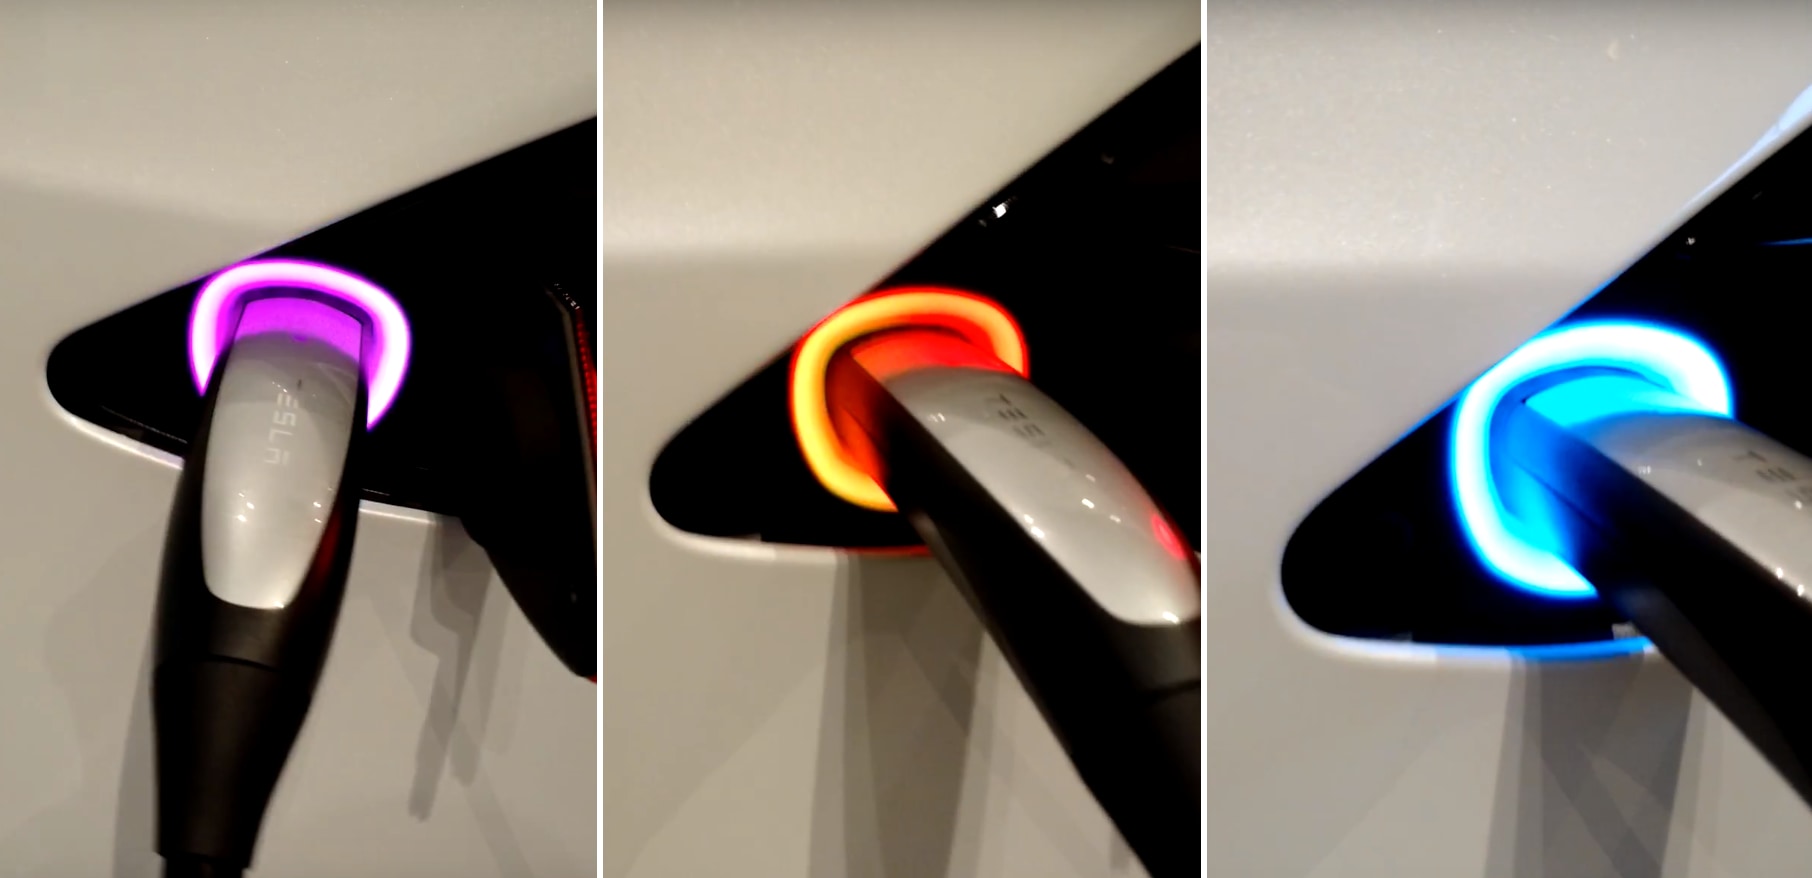 Tesla Chargeport fades in and out in different colors